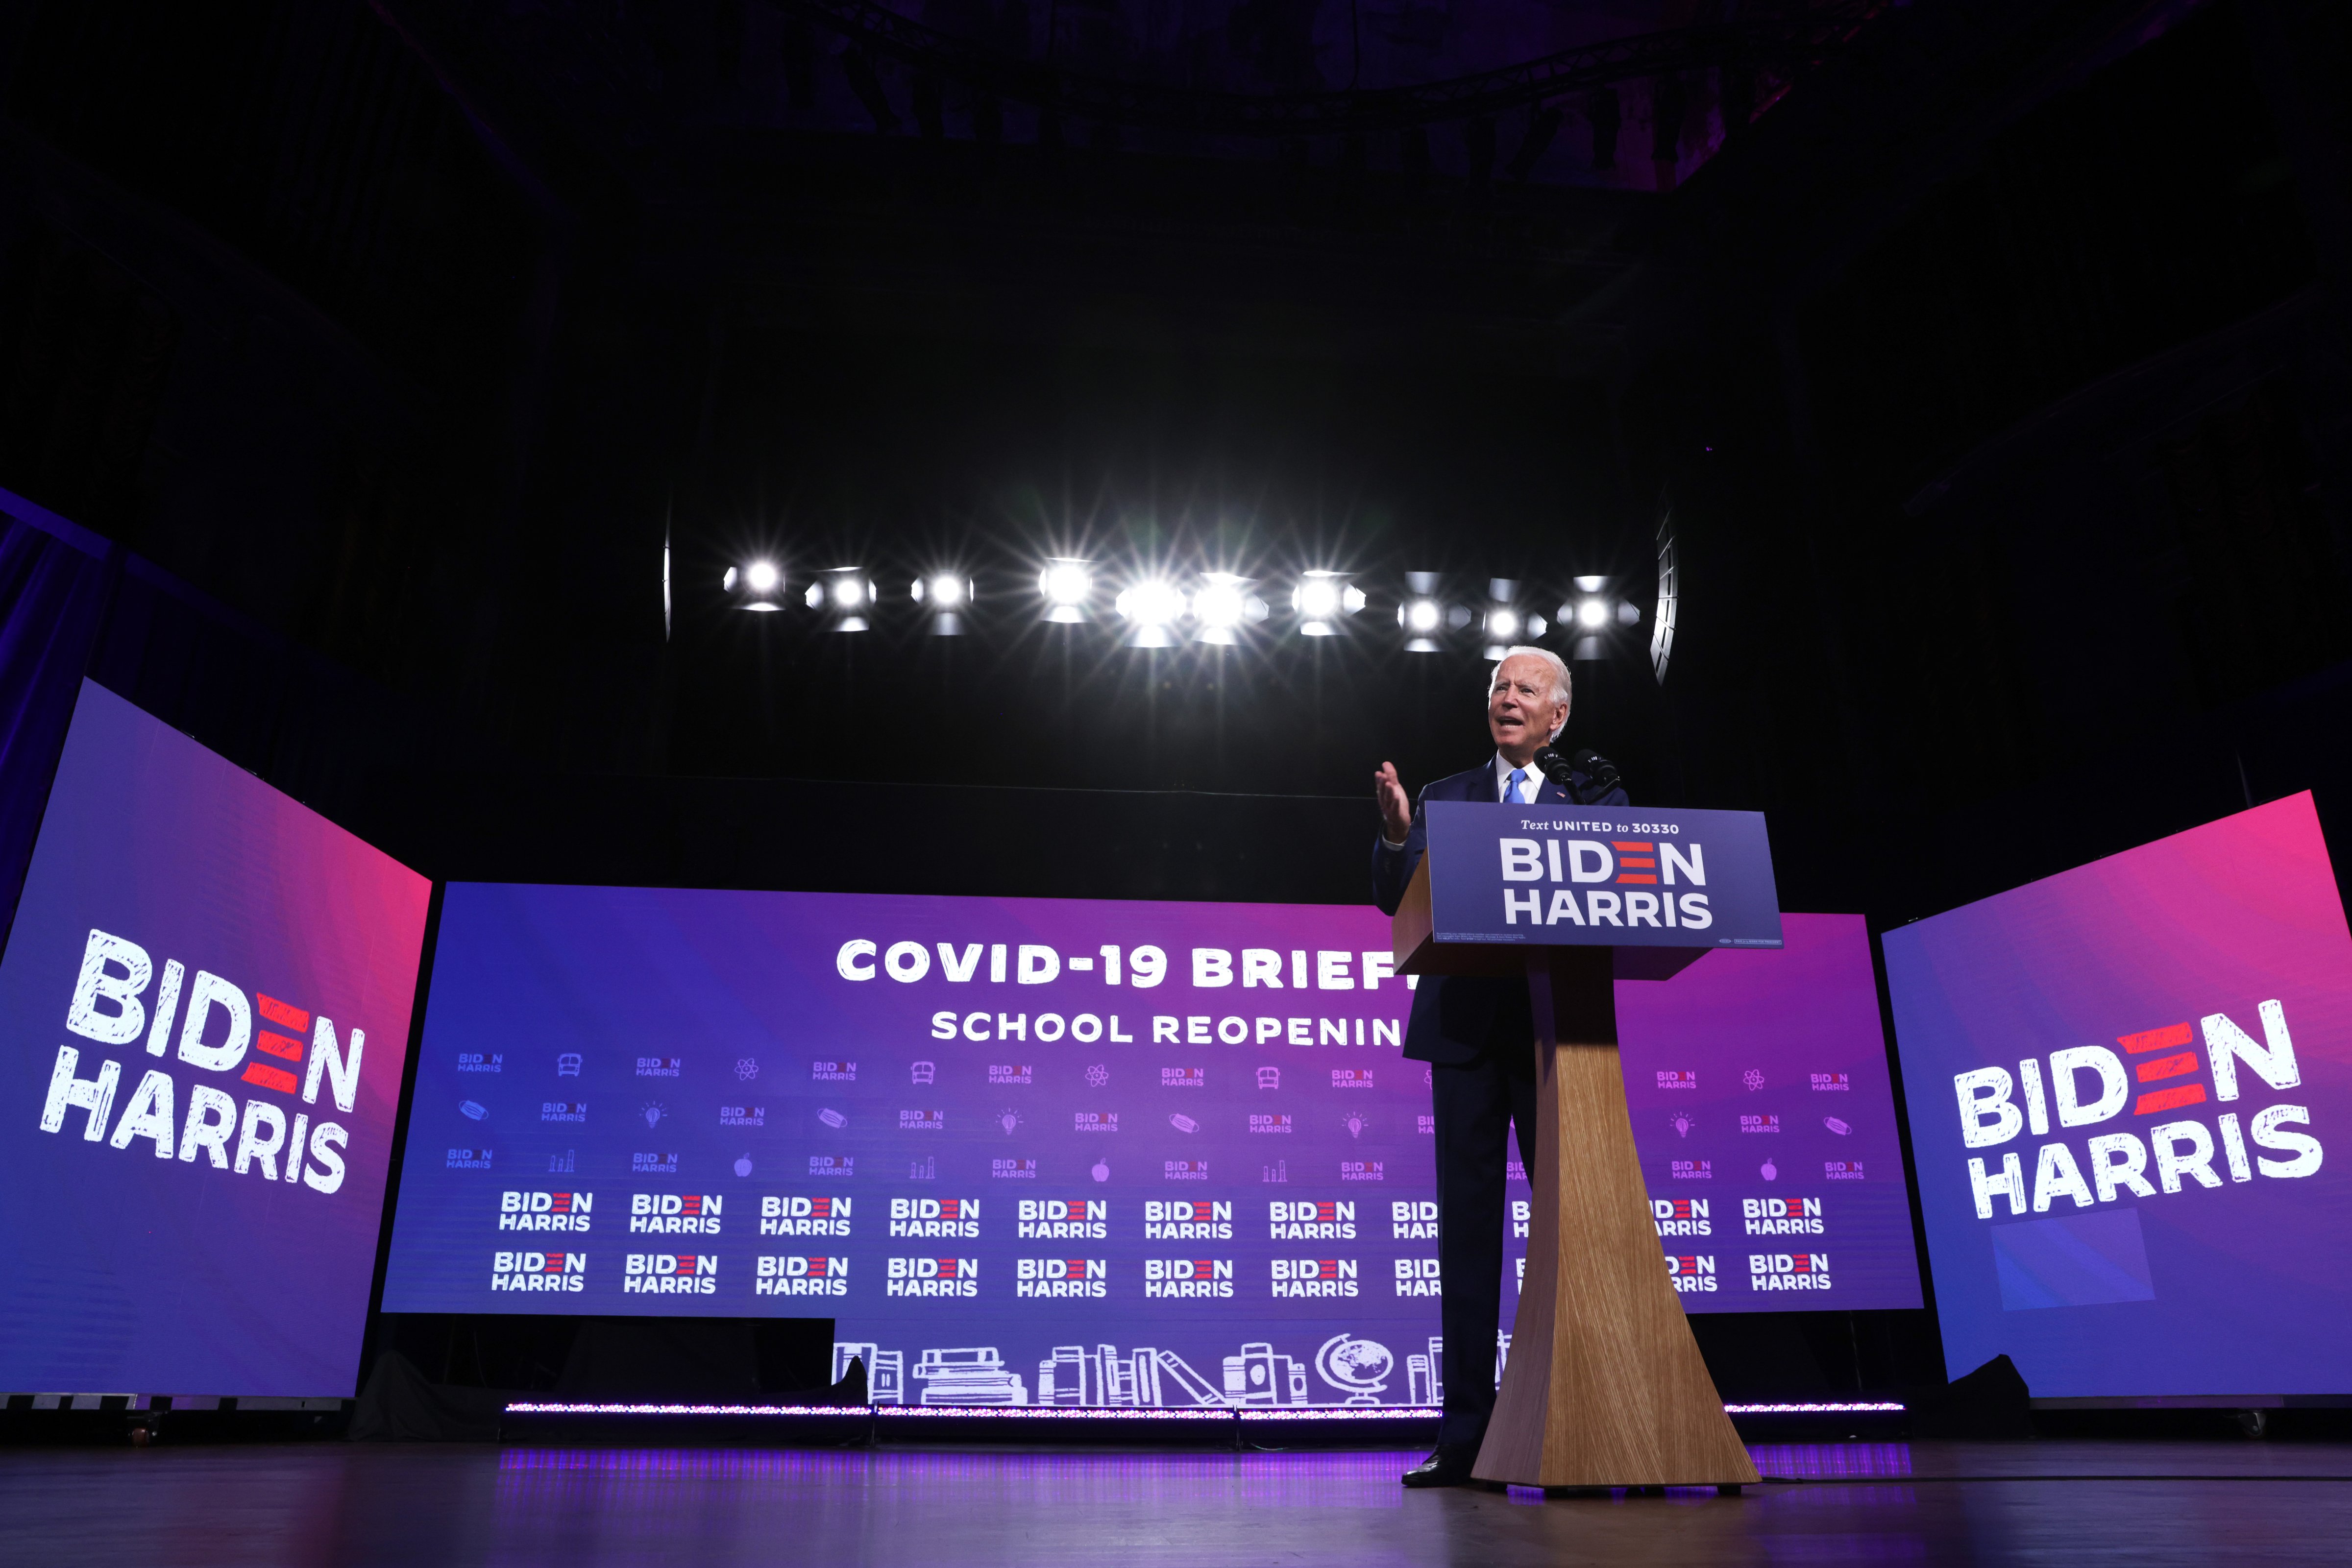 President-elect Joe Biden speaks about safely reopening schools during the coronavirus pandemic at a campaign event Sept. 2, 2020 in Wilmington, Delaware. (Alex Wong—Getty Images)